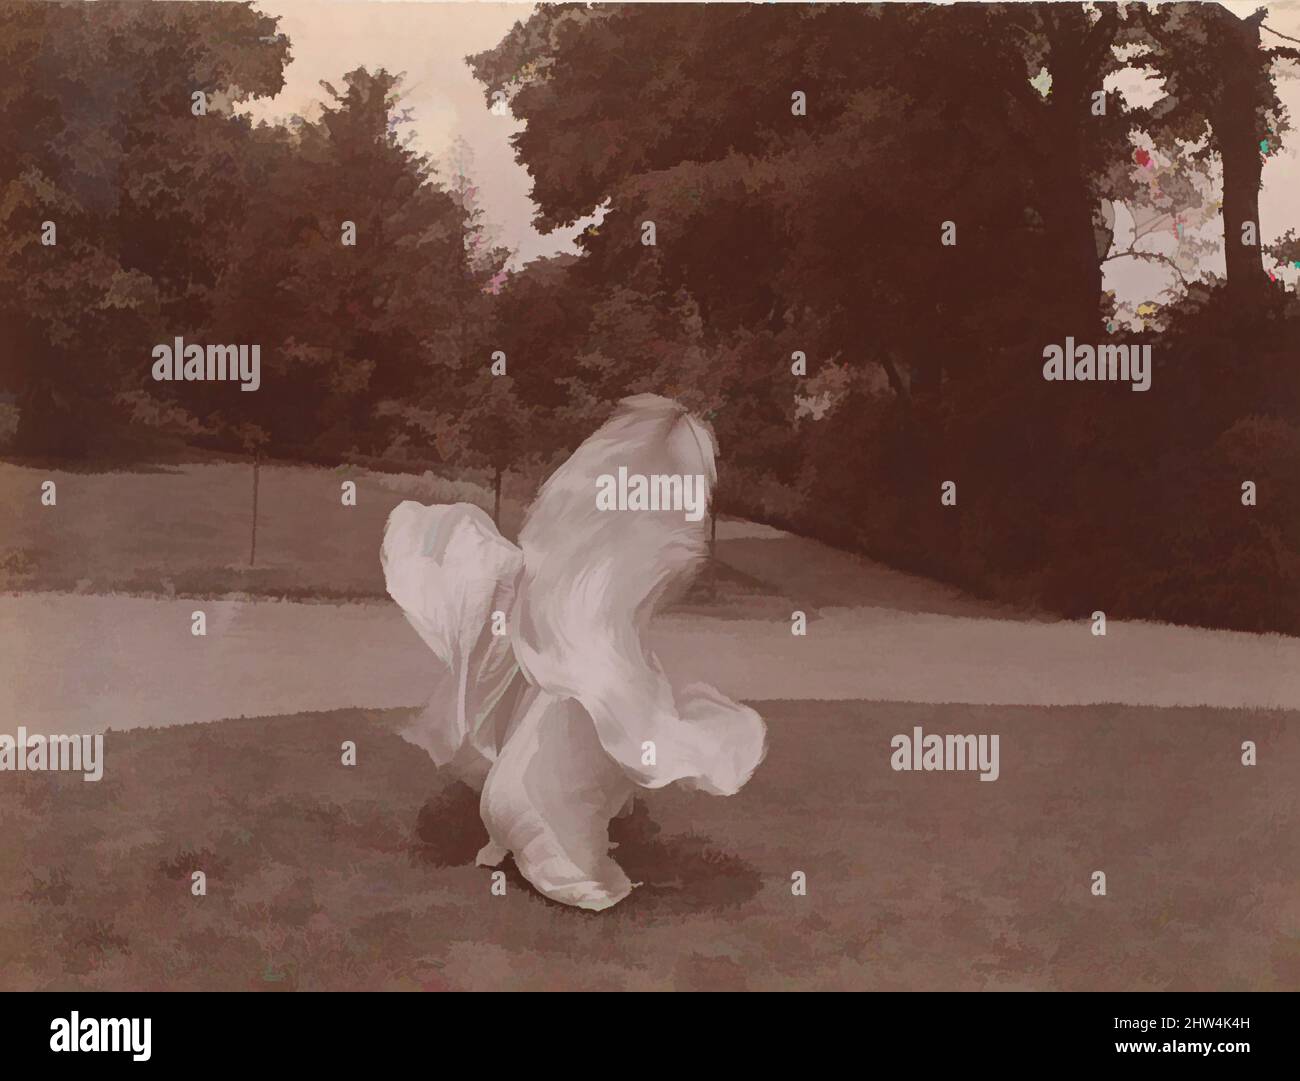 Art inspired by Loie Fuller Dancing, ca. 1900, Gelatin silver print, 7.7 x 10.2 cm (3 1/16 x 4 in.), Photographs, Samuel Joshua Beckett (British, Shadwell, Stepney London 1870–1940 Bournemouth), The American dancer Loie Fuller (1862-1928) conquered Paris on her opening night at the, Classic works modernized by Artotop with a splash of modernity. Shapes, color and value, eye-catching visual impact on art. Emotions through freedom of artworks in a contemporary way. A timeless message pursuing a wildly creative new direction. Artists turning to the digital medium and creating the Artotop NFT Stock Photo